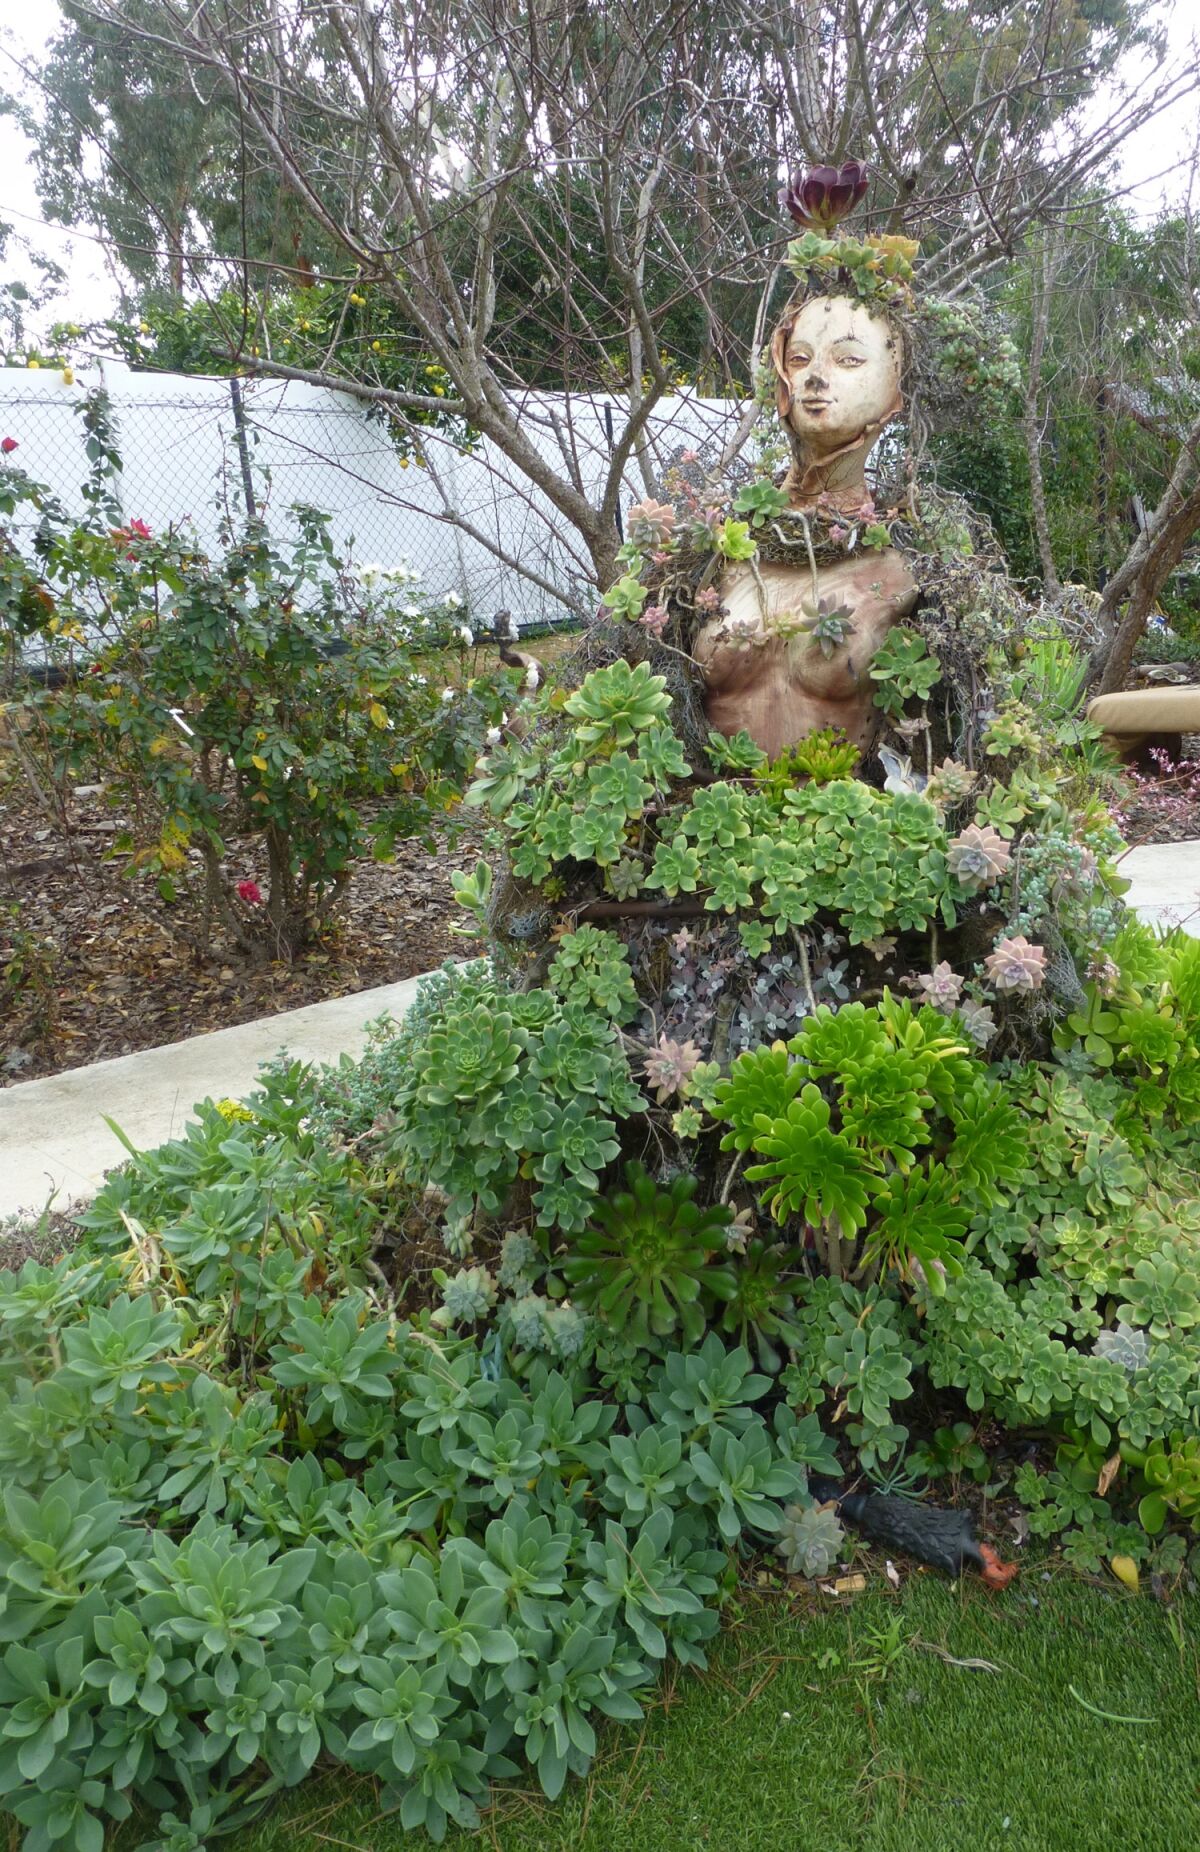 A ceramic statue of a woman in a garden has plants growing from it.